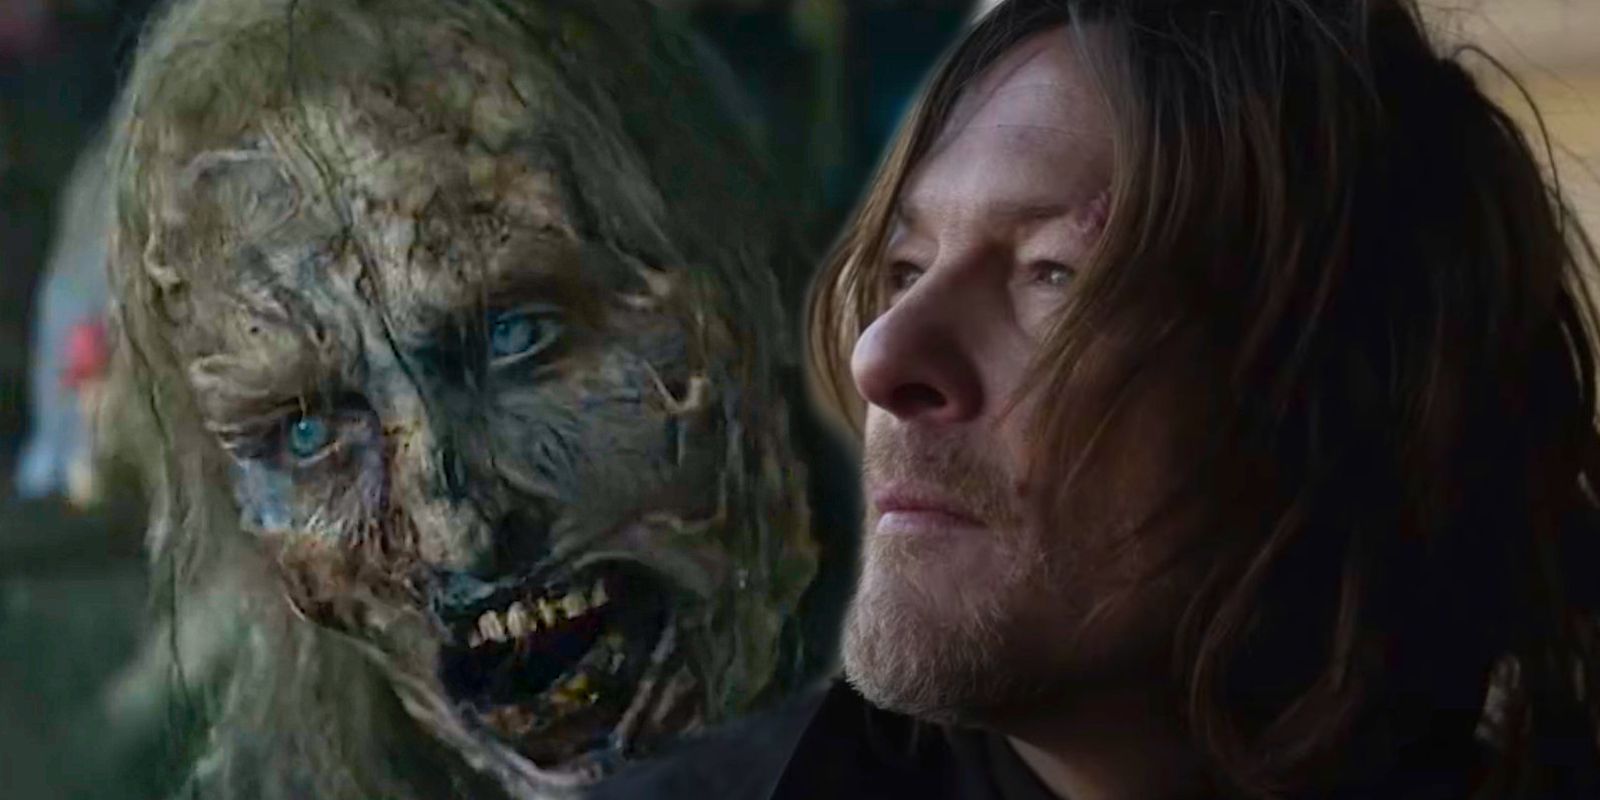 Are You Ready For Five Different 'Walking Dead' Series And A Movie?